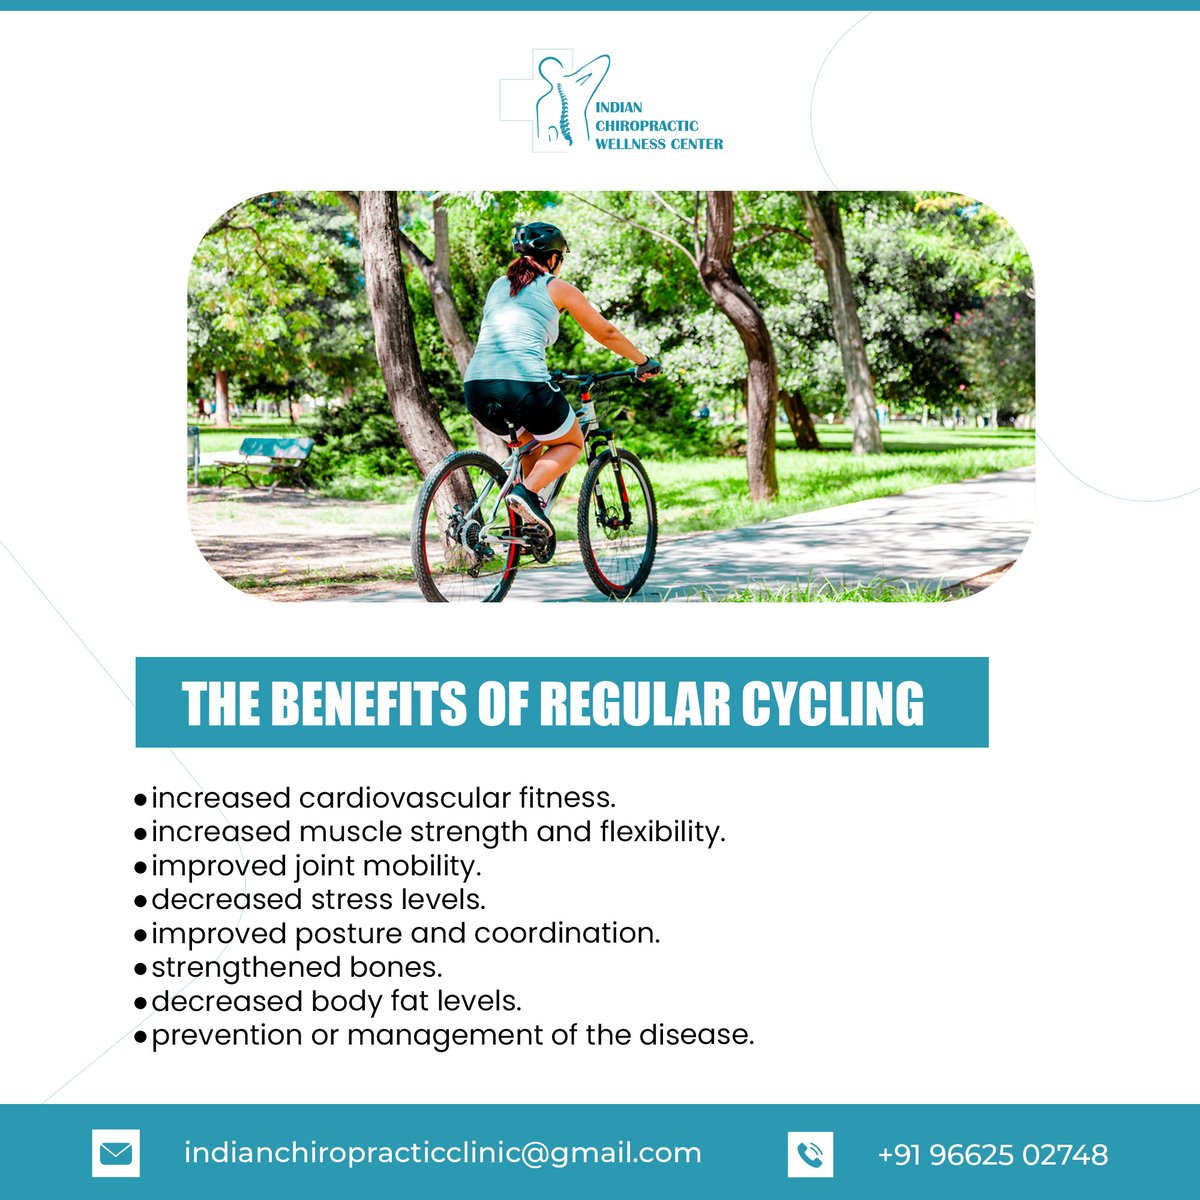 Indian Chiropractic Wellness Center
Appointment booking, 
Call: +91-9662502748 
E-mail: indianchiropracticclinic@gmail.com 

#indianchiropractic #chiropractor #surat #wellness #surti #lifestyle #chiropractornearme #benefitsofcycling #cycling #trentiumsmm